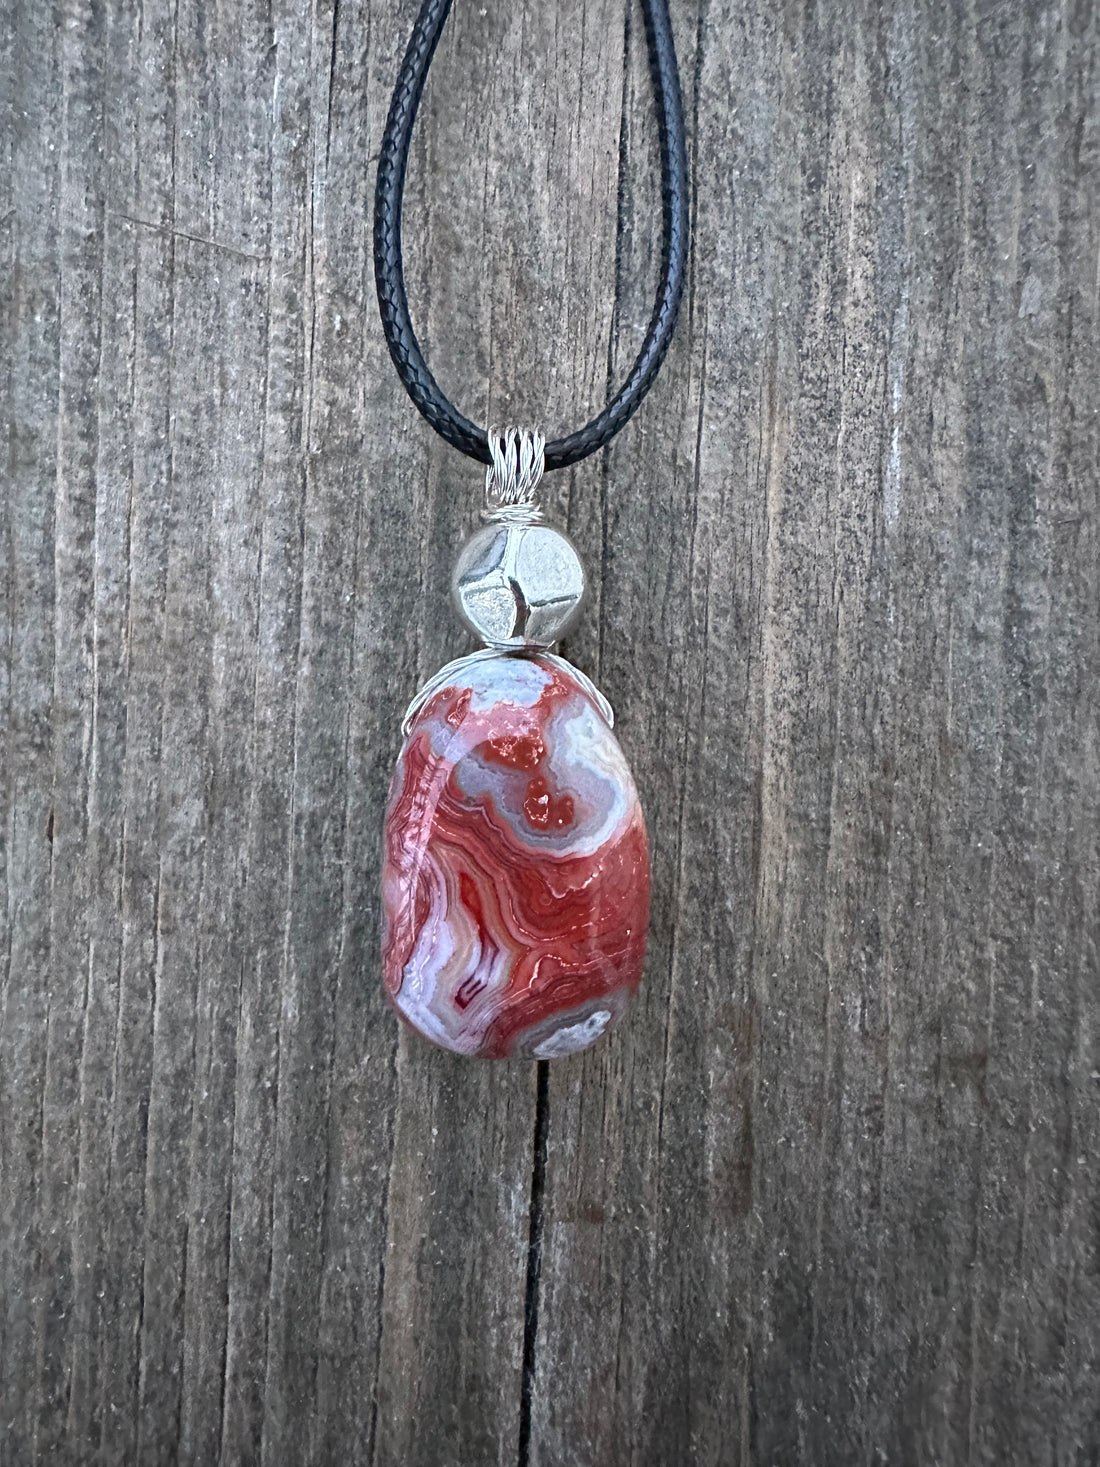 Laguna Lace Agate for Protection, Creativity and Root Chakra Work.